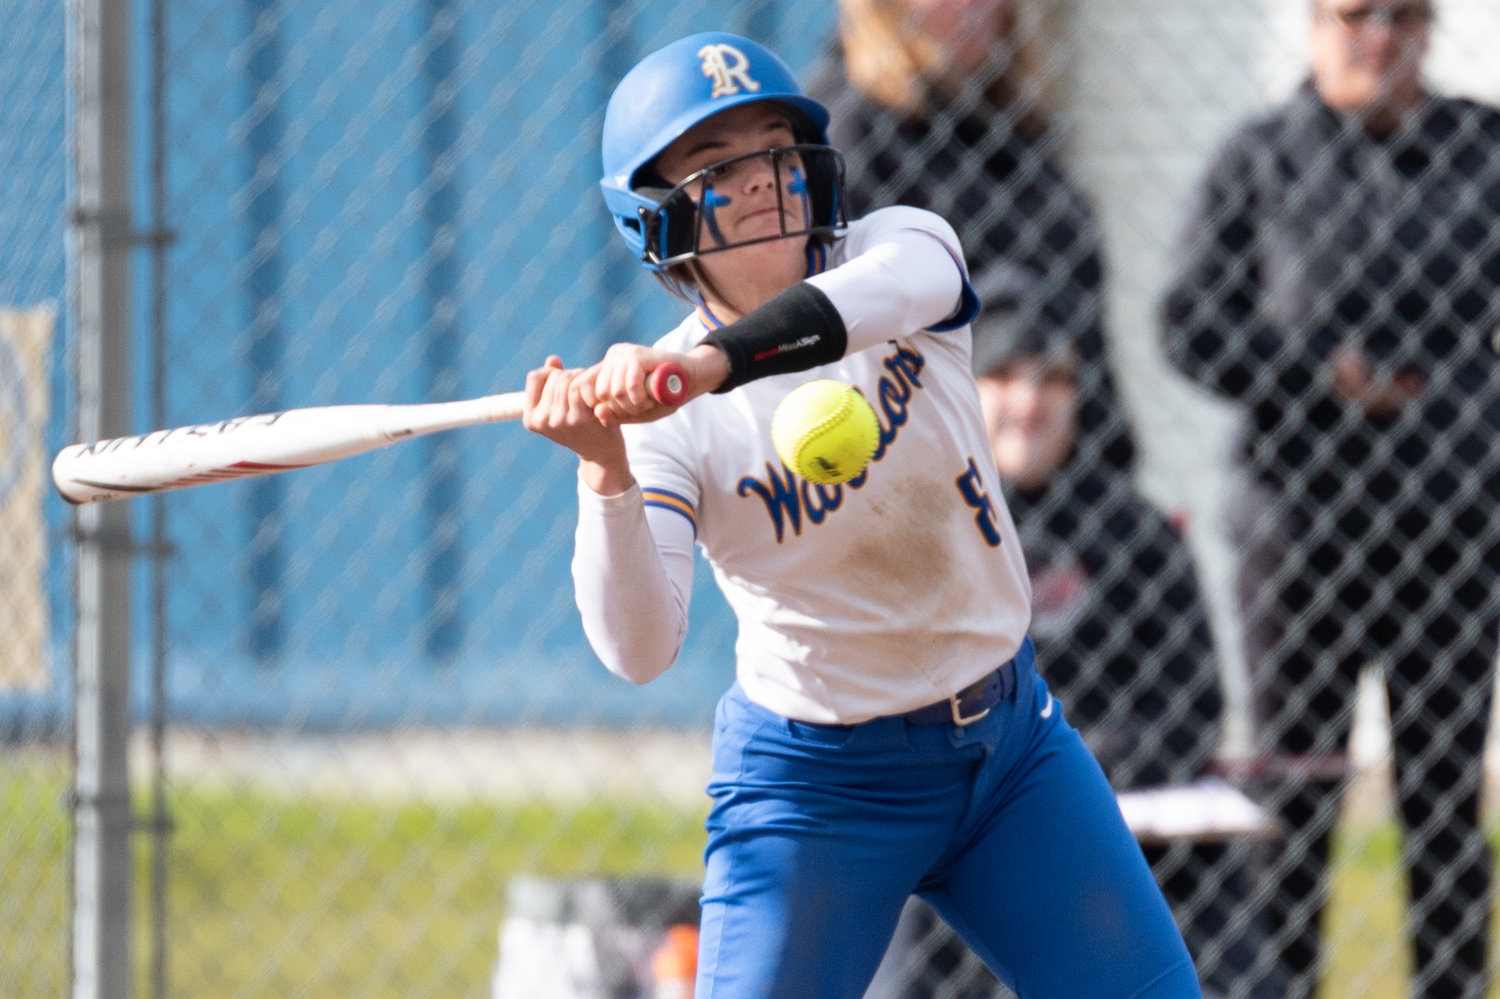 Rochester's Layna Demers swings at a pitch against Shelton April 27.